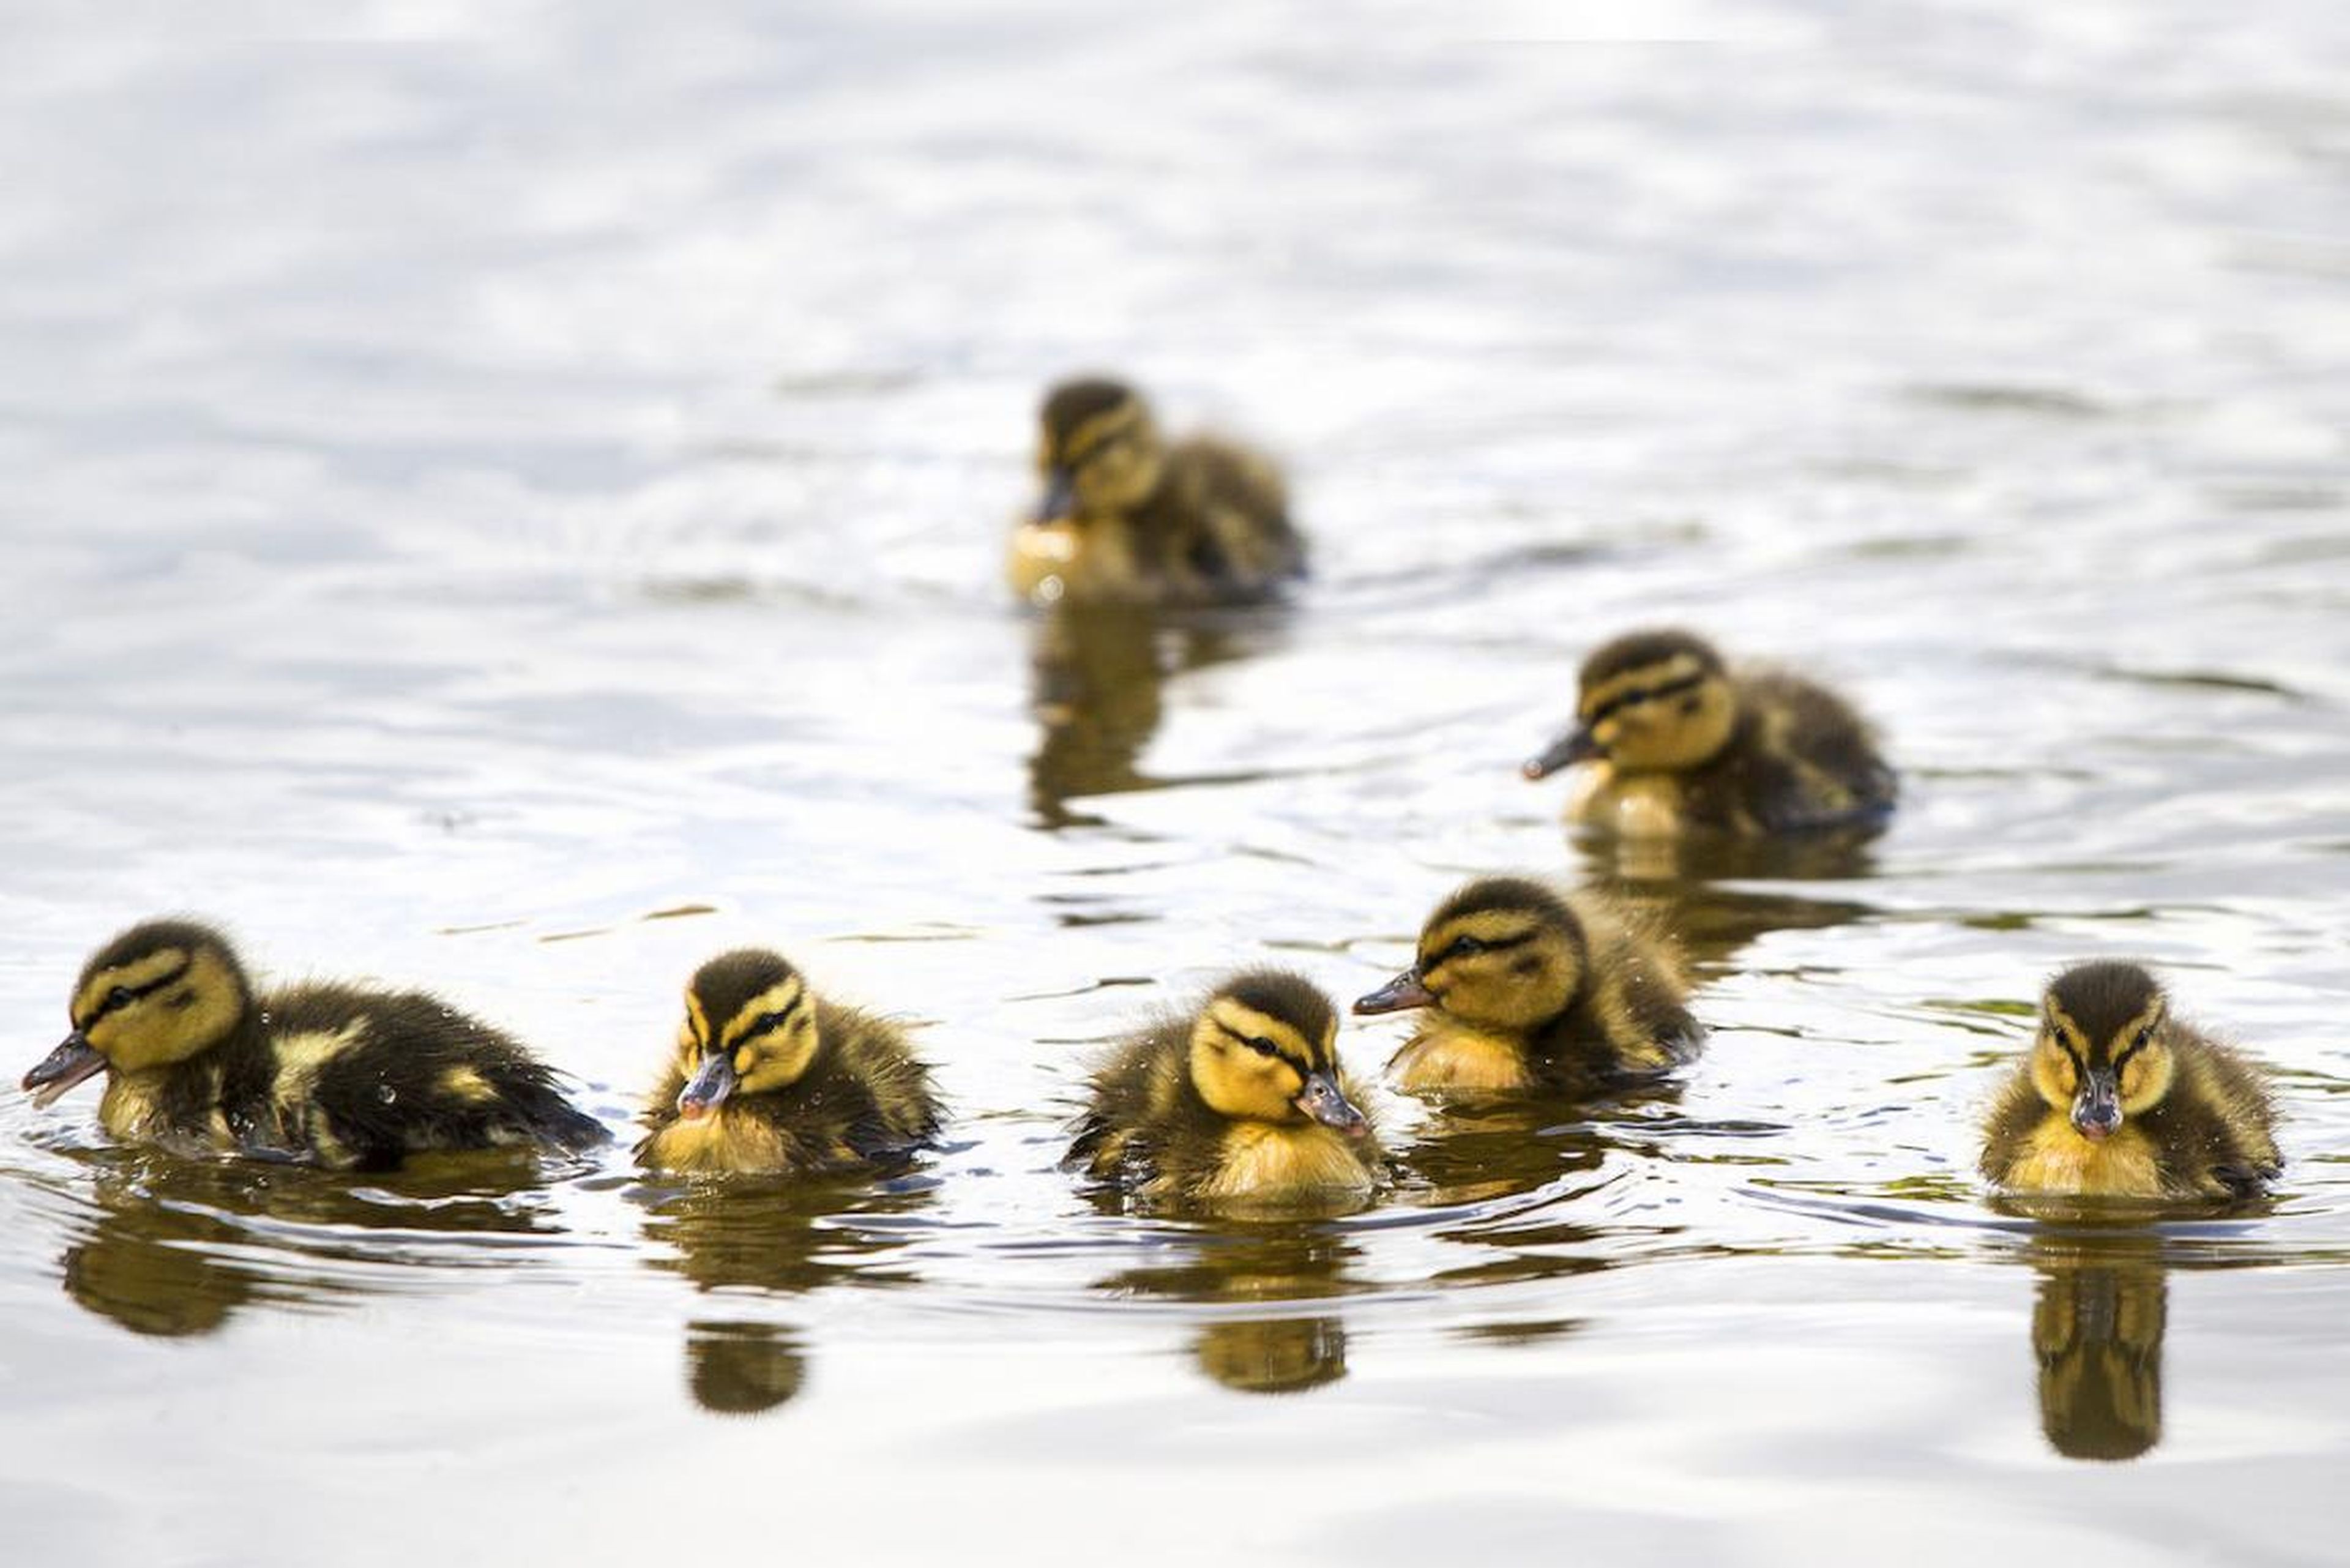 Ducks may be a smarter food source than chickens in the near future, the commission suggests, because they can swim through a flood, if needed.